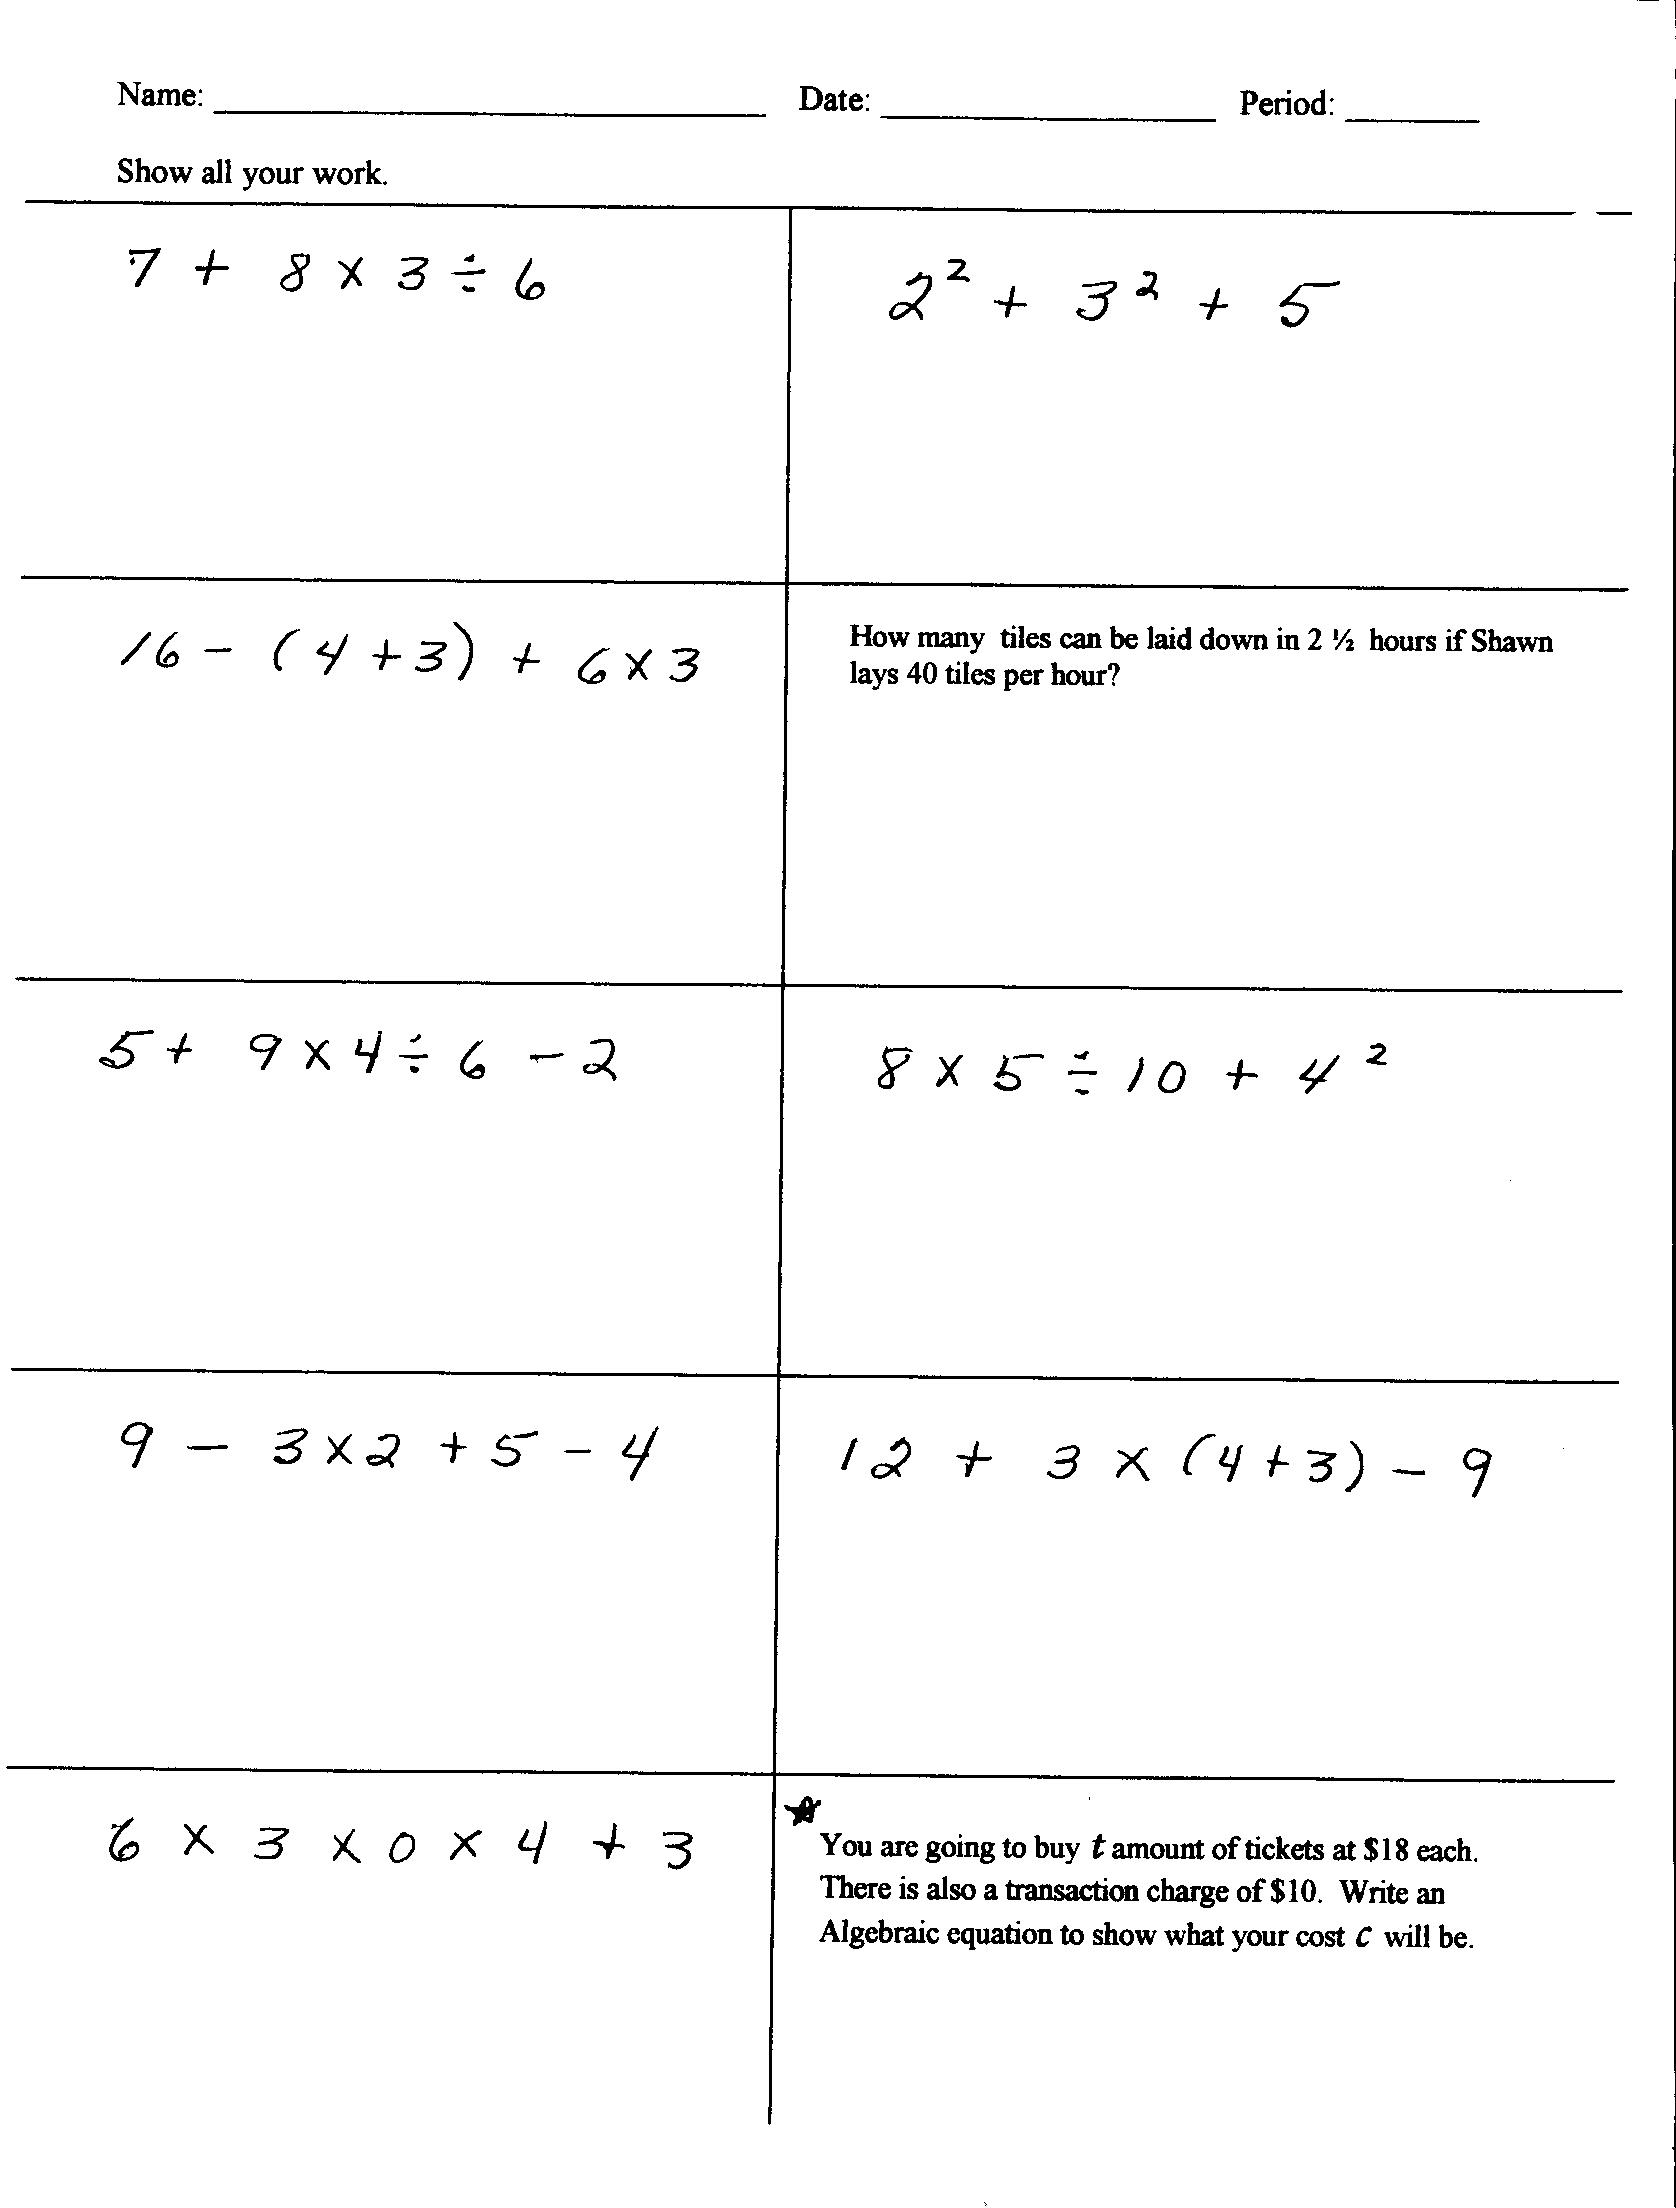 hard-math-problems-for-4th-graders